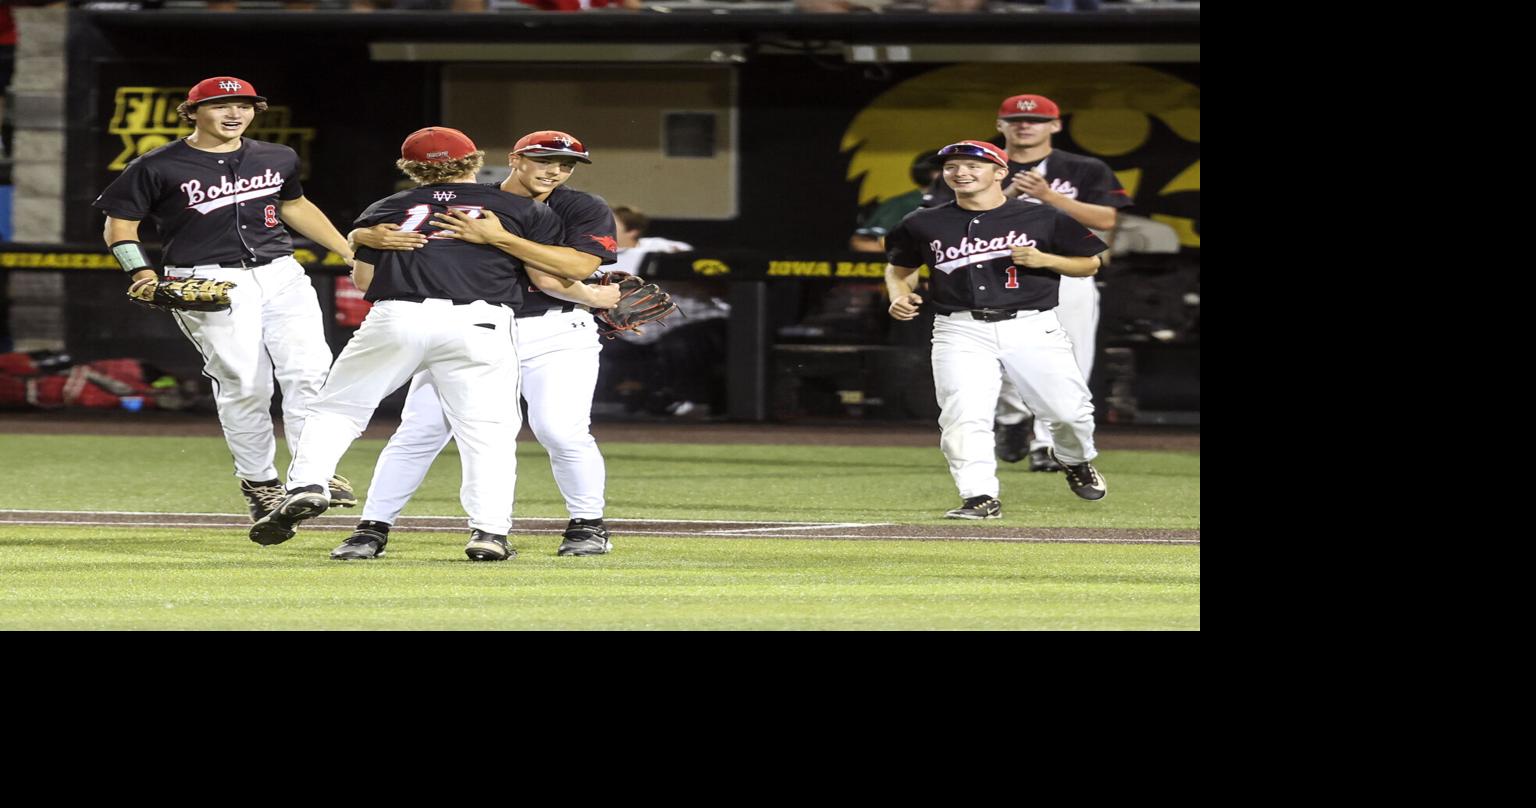 Baseball buzz: Check out these close-cropped Cajuns